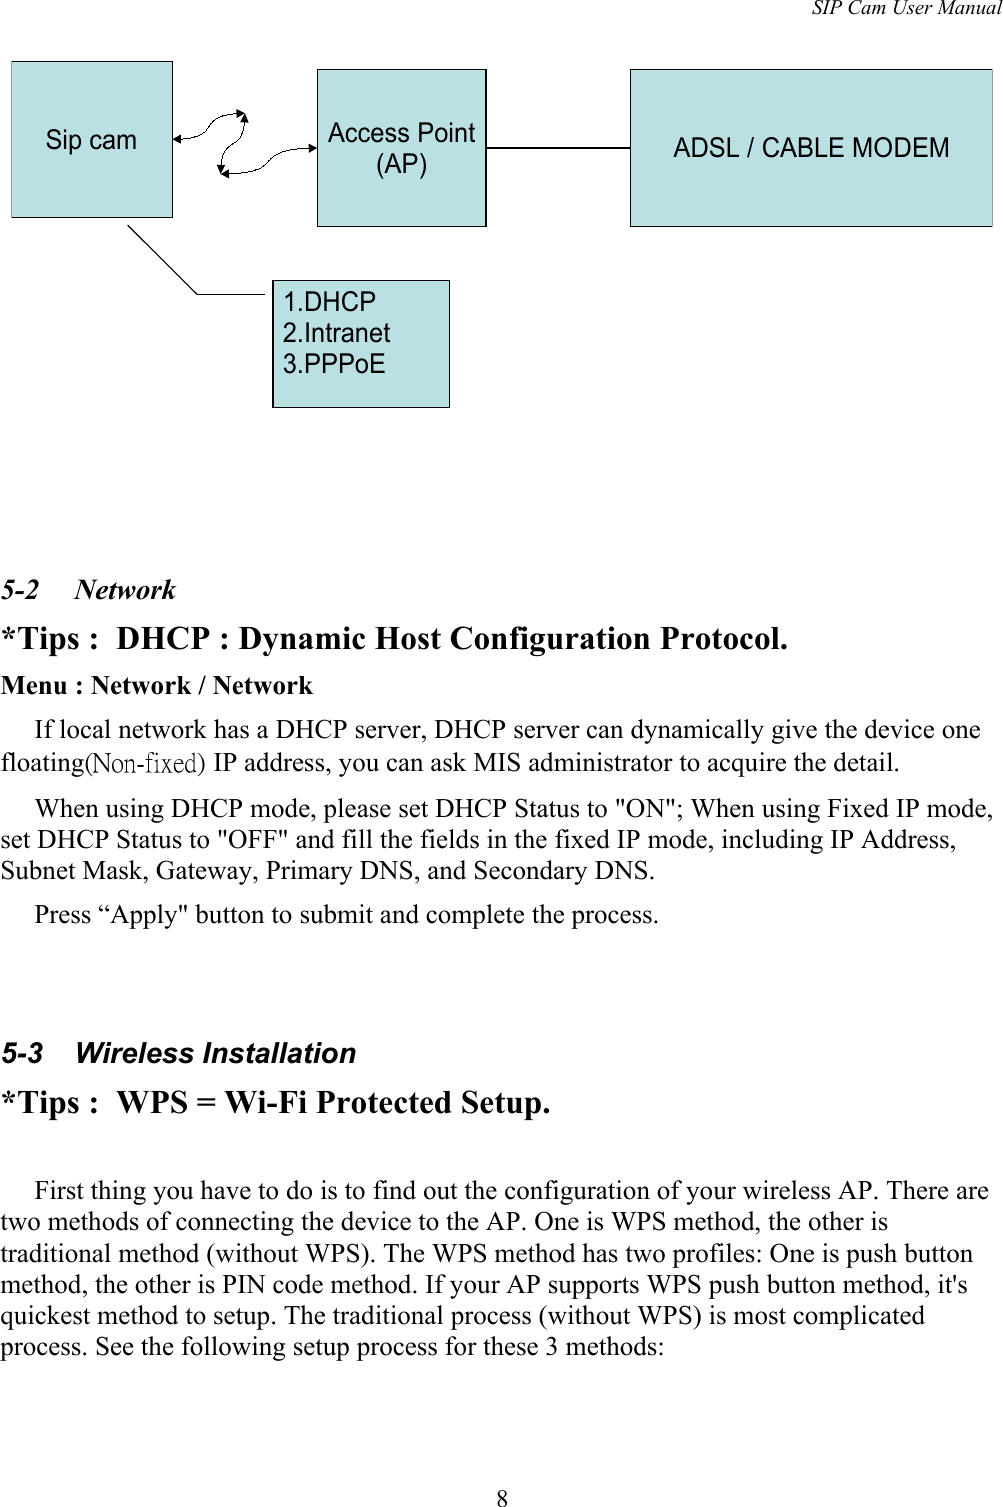 SIP Cam User Manual5-2  Network*Tips :  DHCP : Dynamic Host Configuration Protocol.      Menu : Network / Network          If local network has a DHCP server, DHCP server can dynamically give the device one floating(Non-fixed) IP address, you can ask MIS administrator to acquire the detail.      When using DHCP mode, please set DHCP Status to &quot;ON&quot;; When using Fixed IP mode, set DHCP Status to &quot;OFF&quot; and fill the fields in the fixed IP mode, including IP Address, Subnet Mask, Gateway, Primary DNS, and Secondary DNS.          Press “Apply&quot; button to submit and complete the process. 5-3  Wireless Installation*Tips :  WPS = Wi-Fi Protected Setup.     First thing you have to do is to find out the configuration of your wireless AP. There are two methods of connecting the device to the AP. One is WPS method, the other is traditional method (without WPS). The WPS method has two profiles: One is push button method, the other is PIN code method. If your AP supports WPS push button method, it&apos;s quickest method to setup. The traditional process (without WPS) is most complicated process. See the following setup process for these 3 methods: 8Sip cam ADSL / CABLE MODEMAccess Point(AP)1.DHCP2.Intranet3.PPPoE